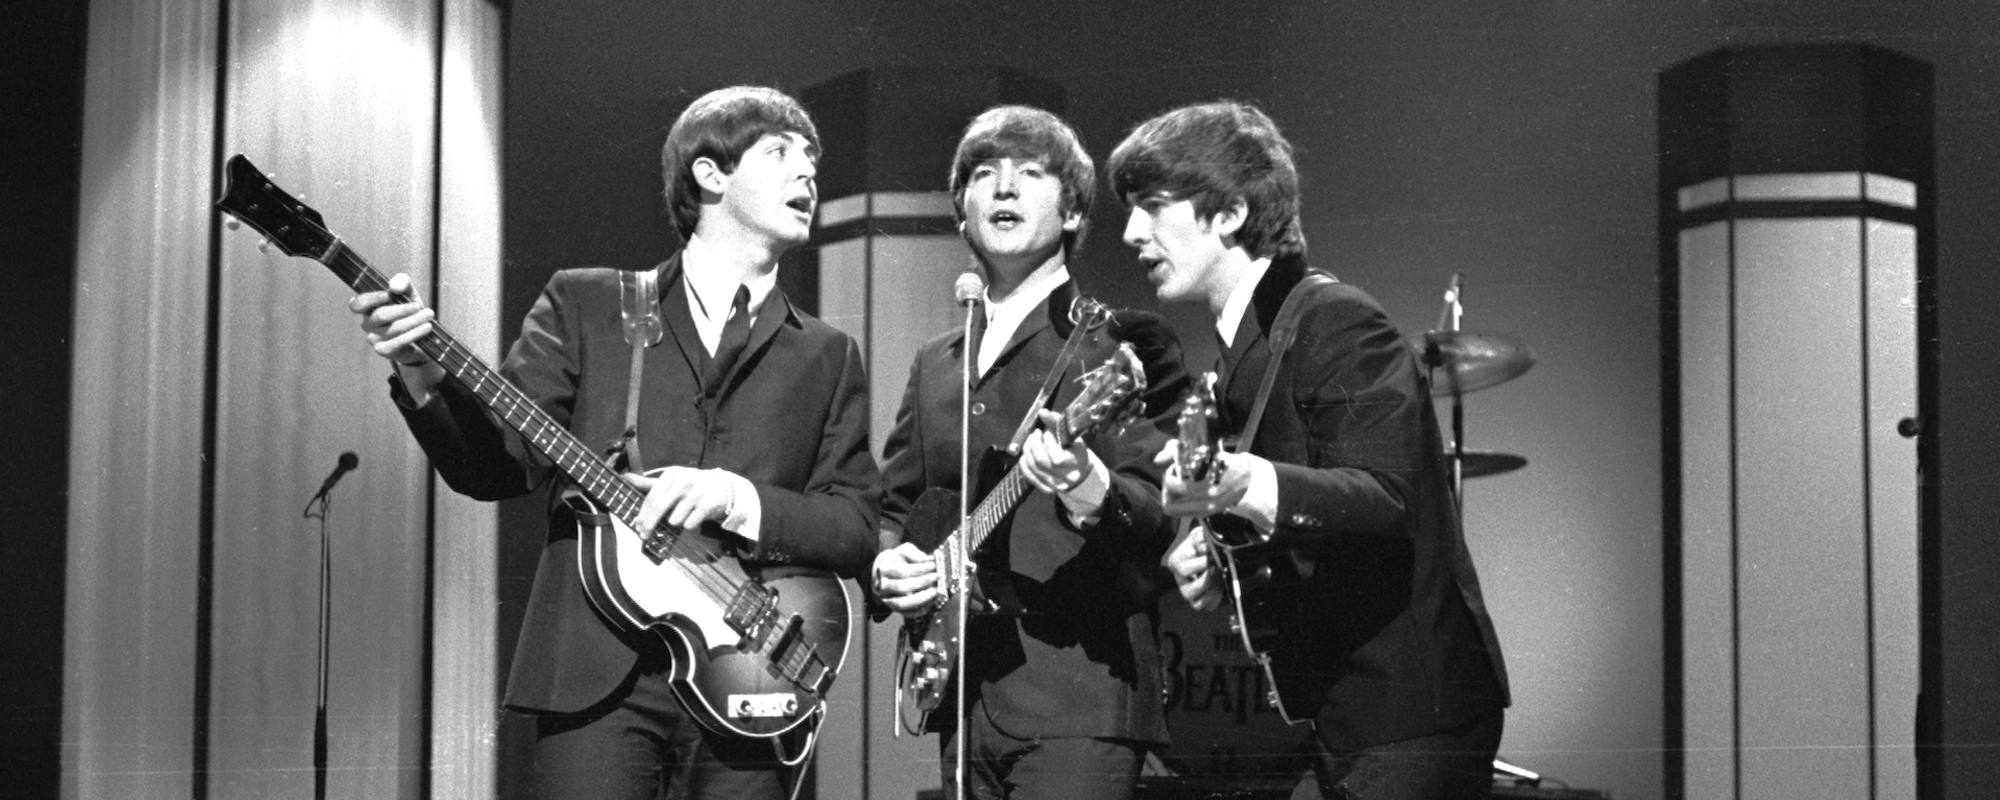 On This Day: The Beatles Recorded “She Loves You” and “I Want to Hold Your Hand” in German (Listen to Both)